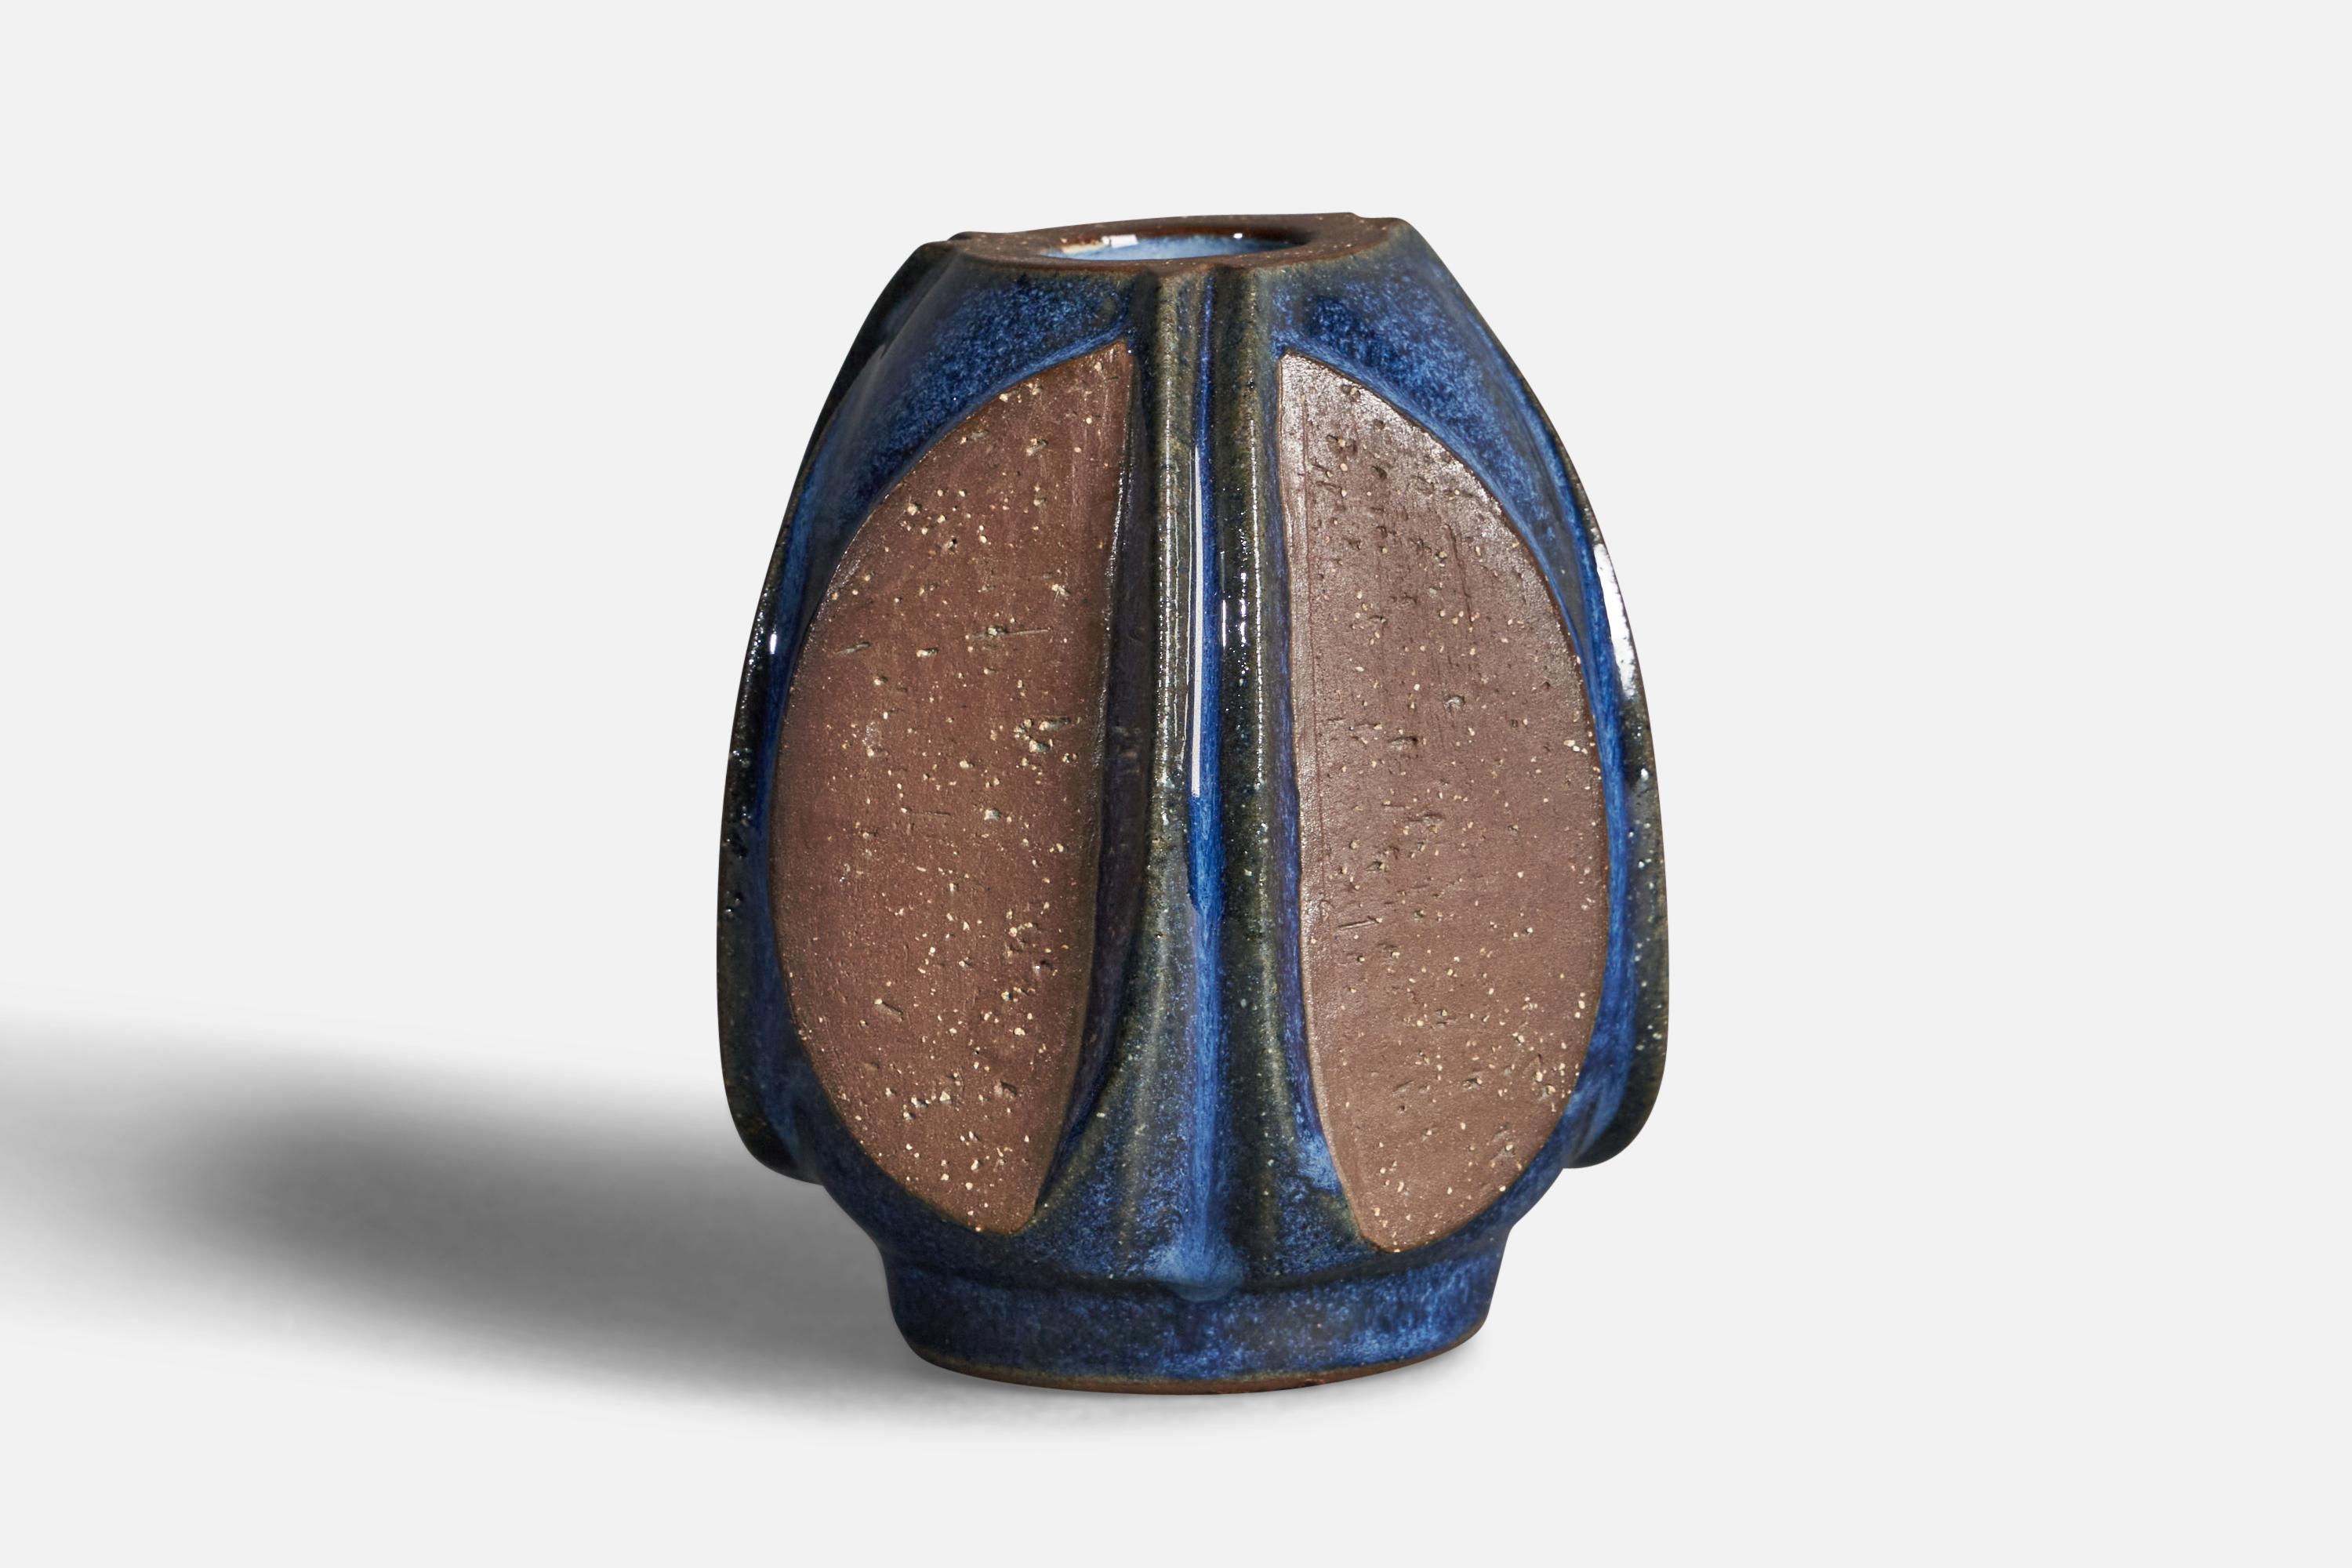 A semi blue-glazed stoneware vase designed by Marianne Starck and produced by Michael Andersen, Bornholm, Denmark, c. 1960s.